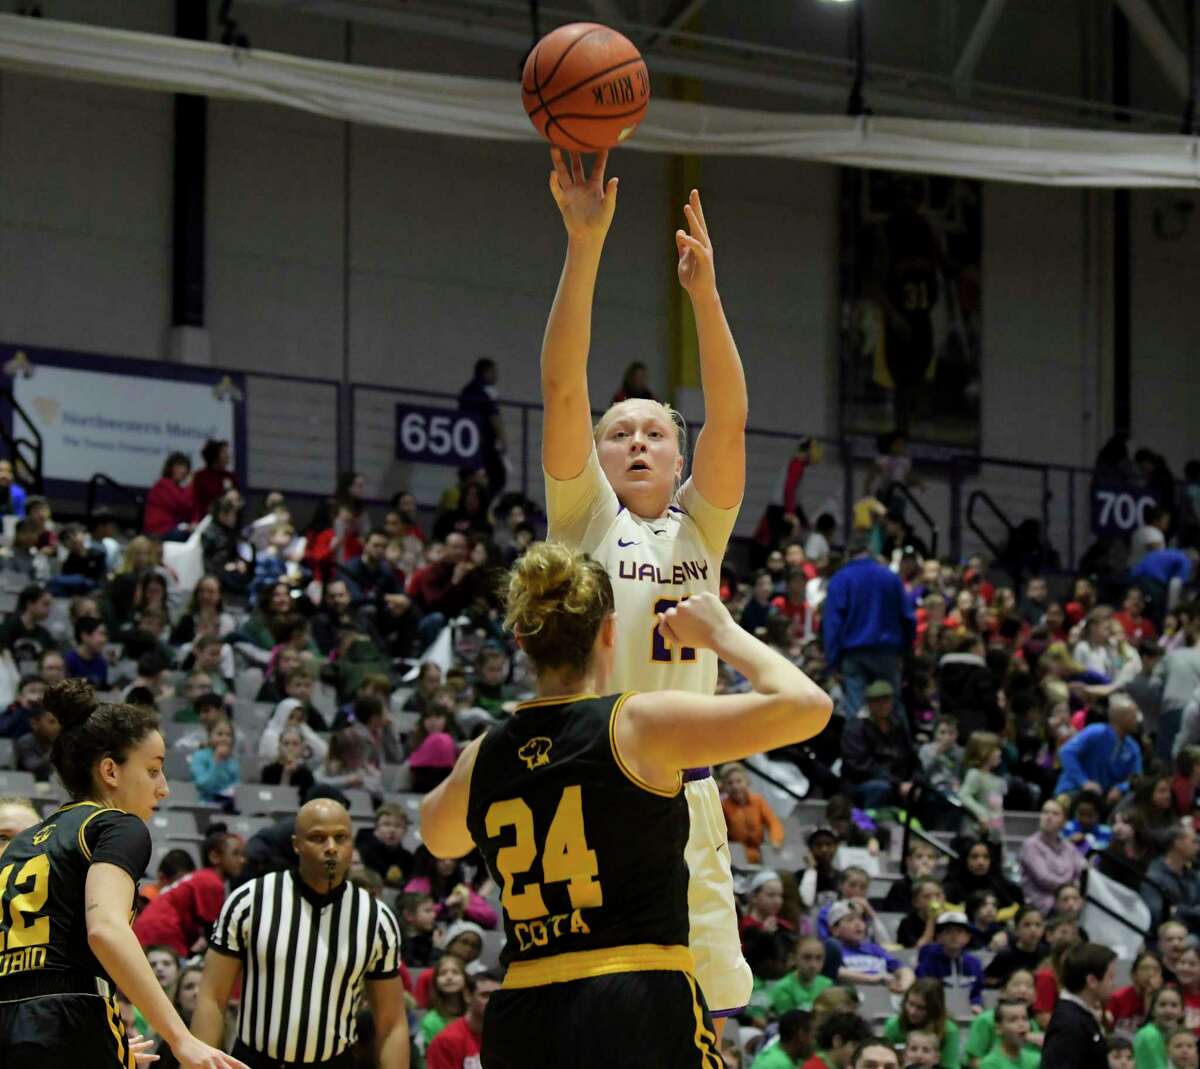 UAlbany's Helene Haegerstrand puts up a shot over a UMBC player in a 2020 matchup. Haegerstrand, who's from Stockholm, said coming to the U.S. for college allowed her to balance basketball and school in a way she couldn't in Sweden.